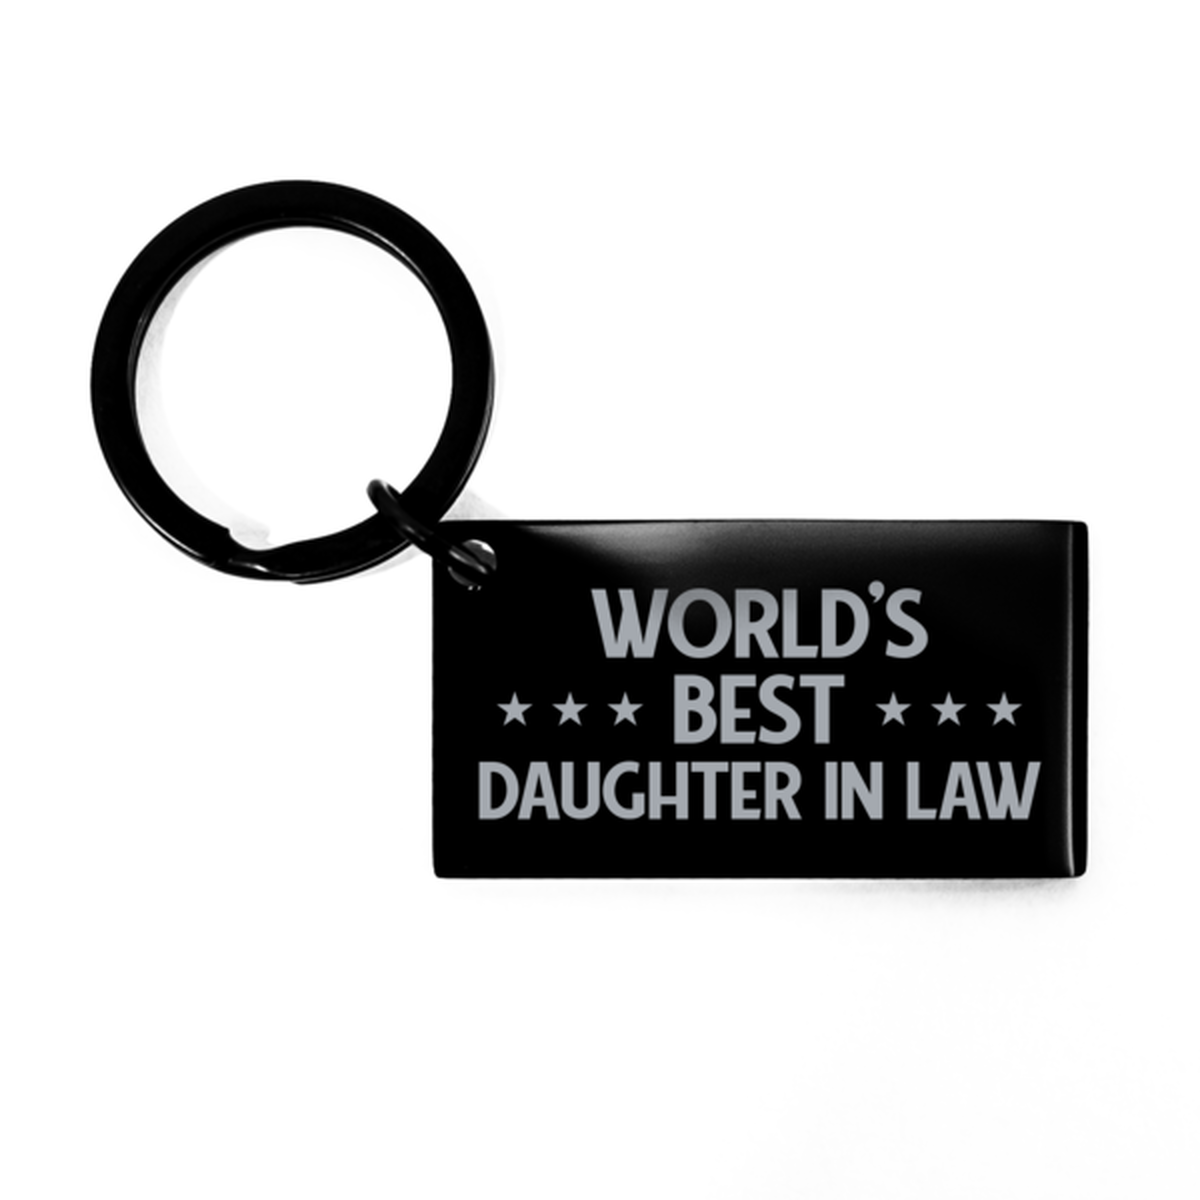 Worlds Best Daughter in law Gifts, Funny Black Engraved Keychain For Daughter in law, Birthday Presents For Women